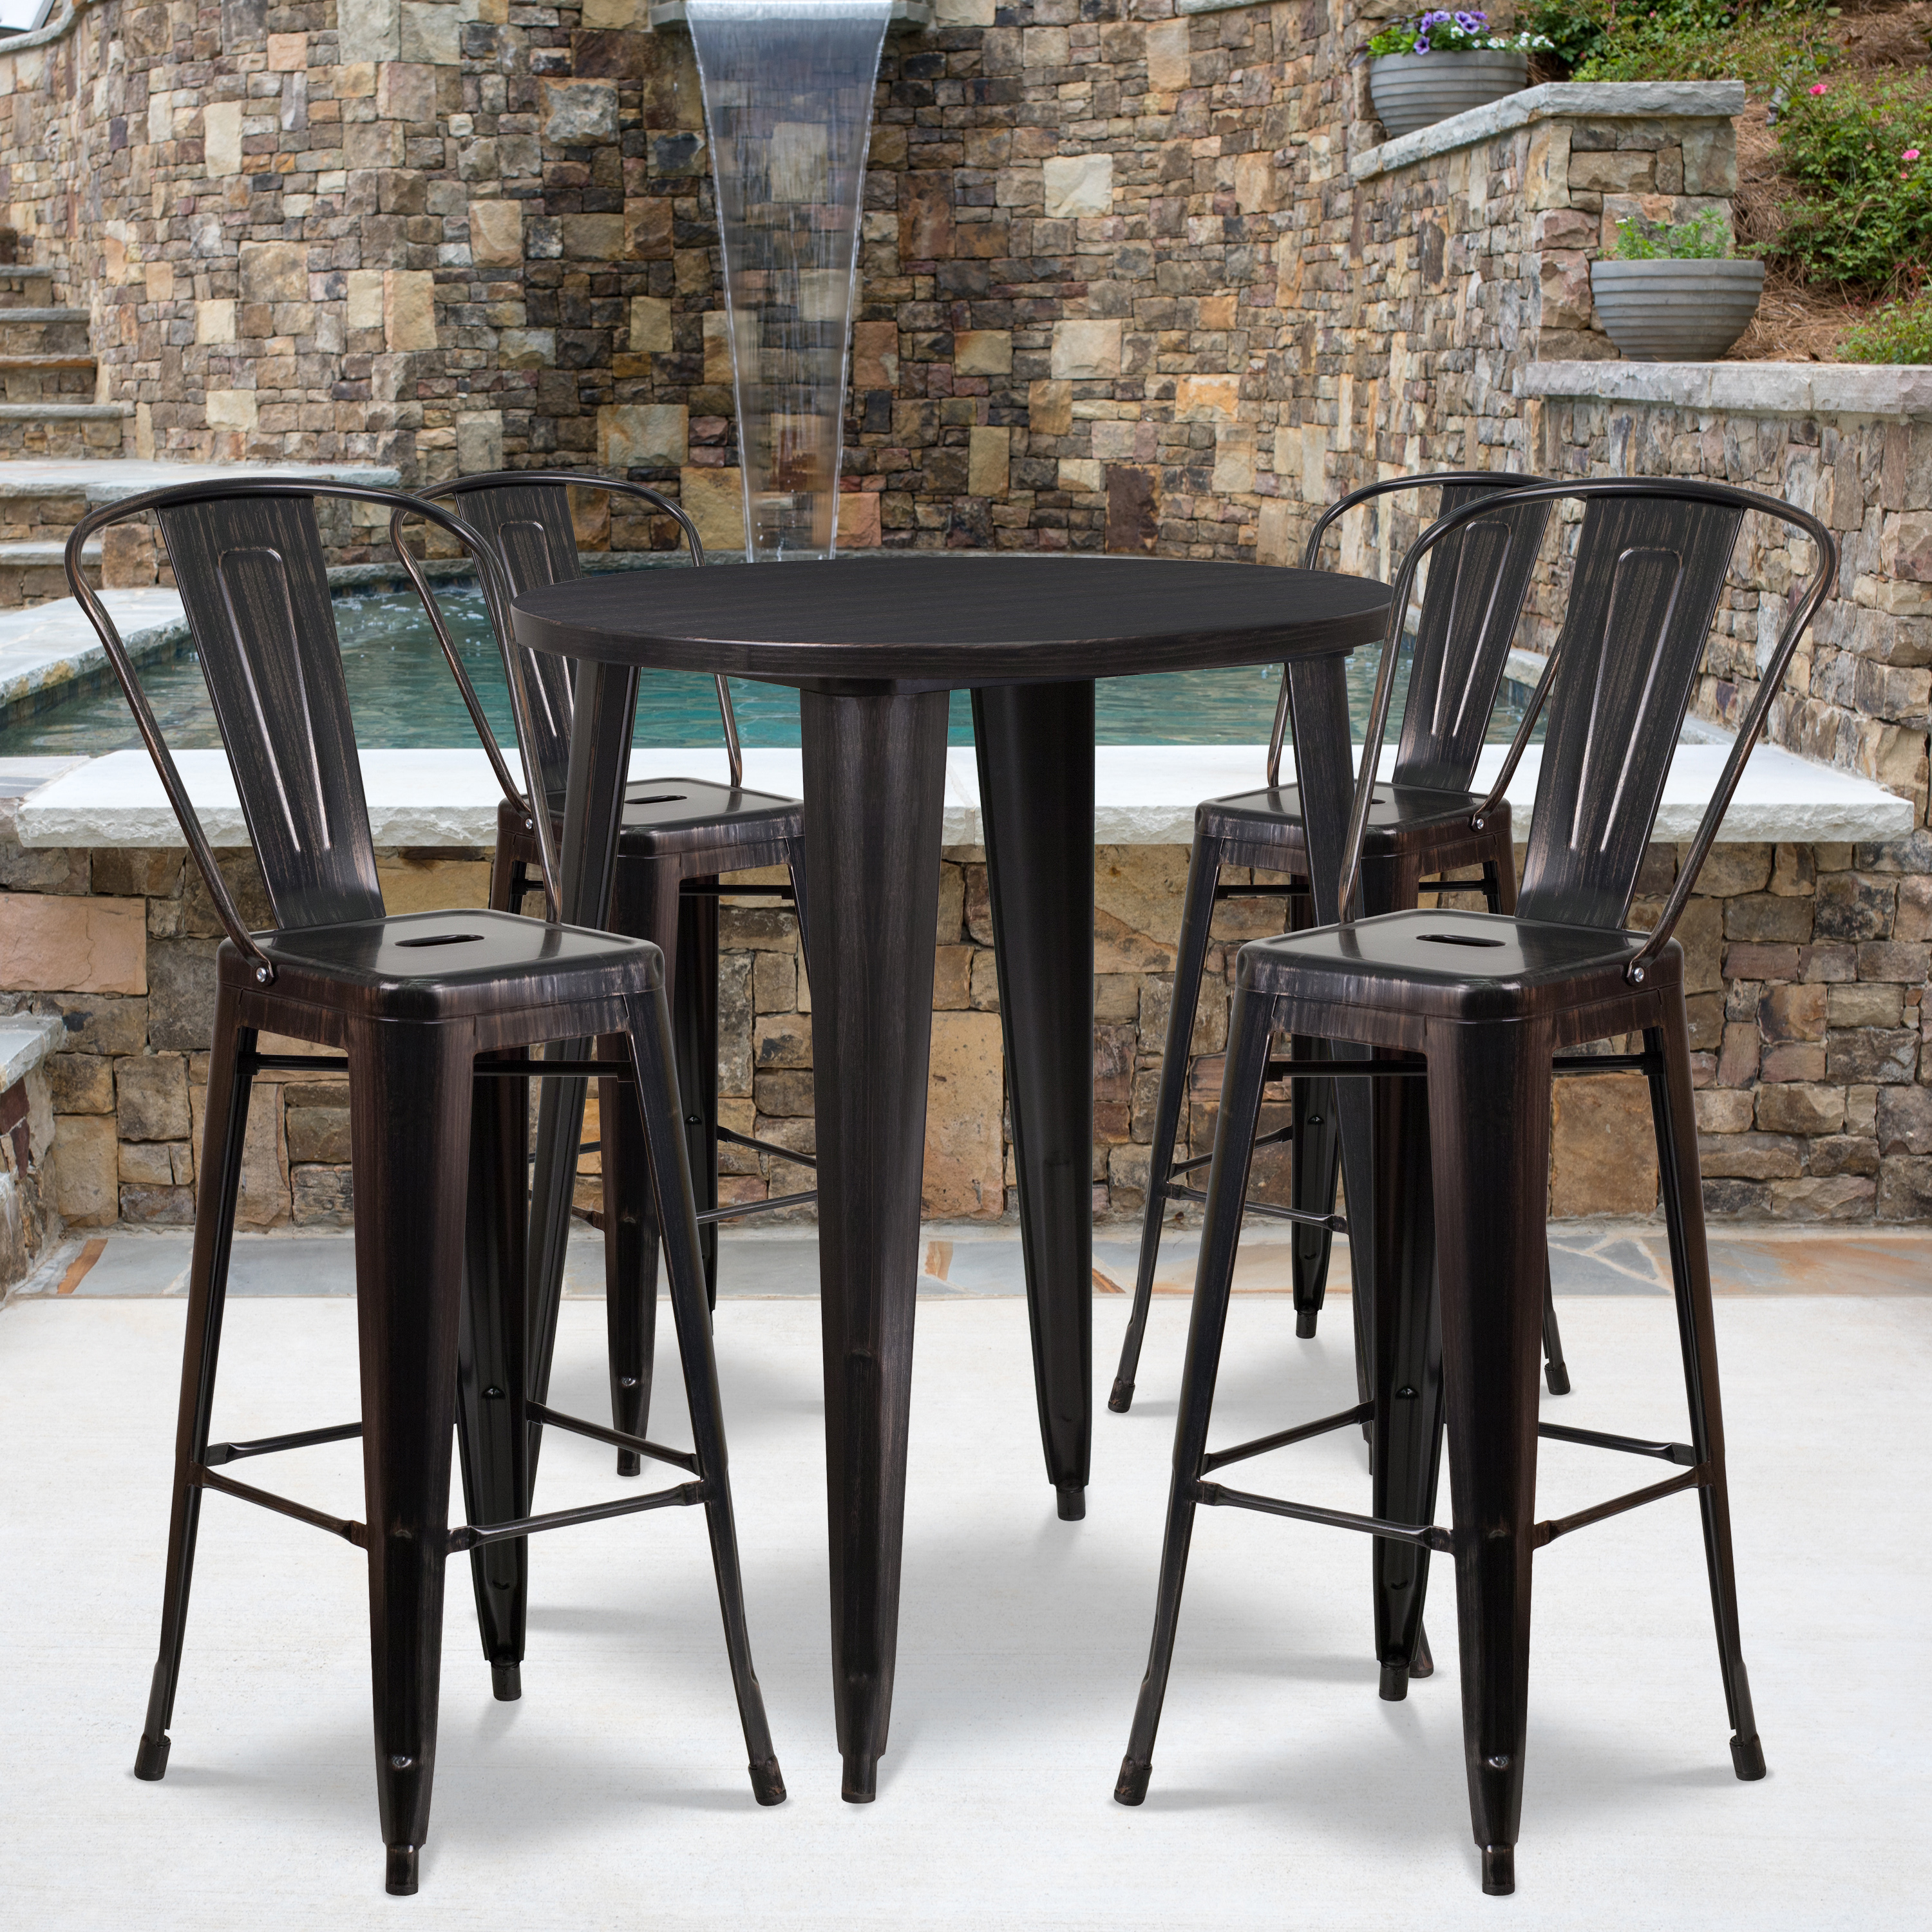 Flash Furniture Commercial Grade 30" Round Black-Antique Gold Metal Indoor-Outdoor Bar Table Set with 4 Cafe Stools - image 1 of 5